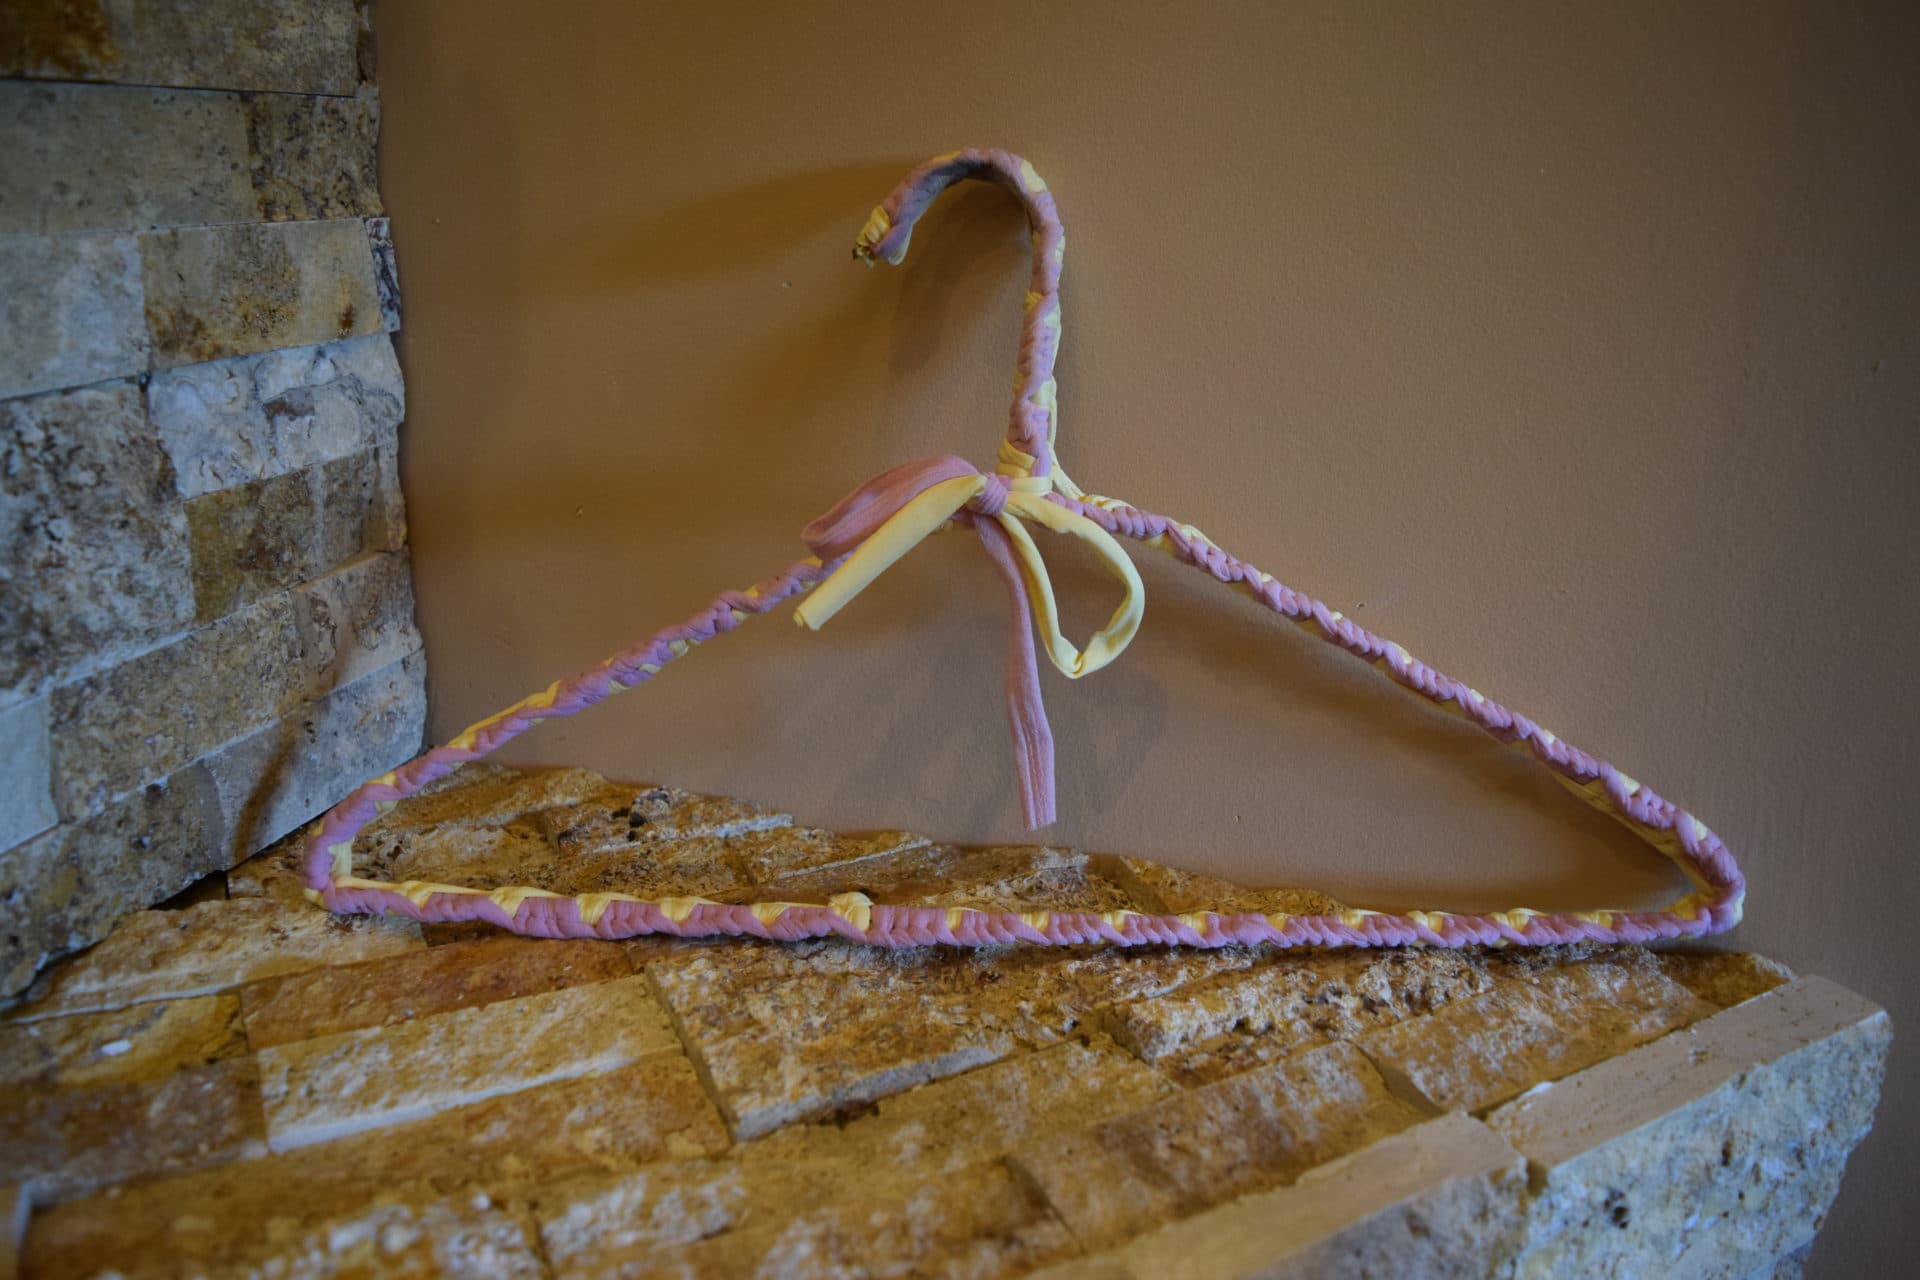 Gina's favorite hanger wrapped in lavendar and yellow material